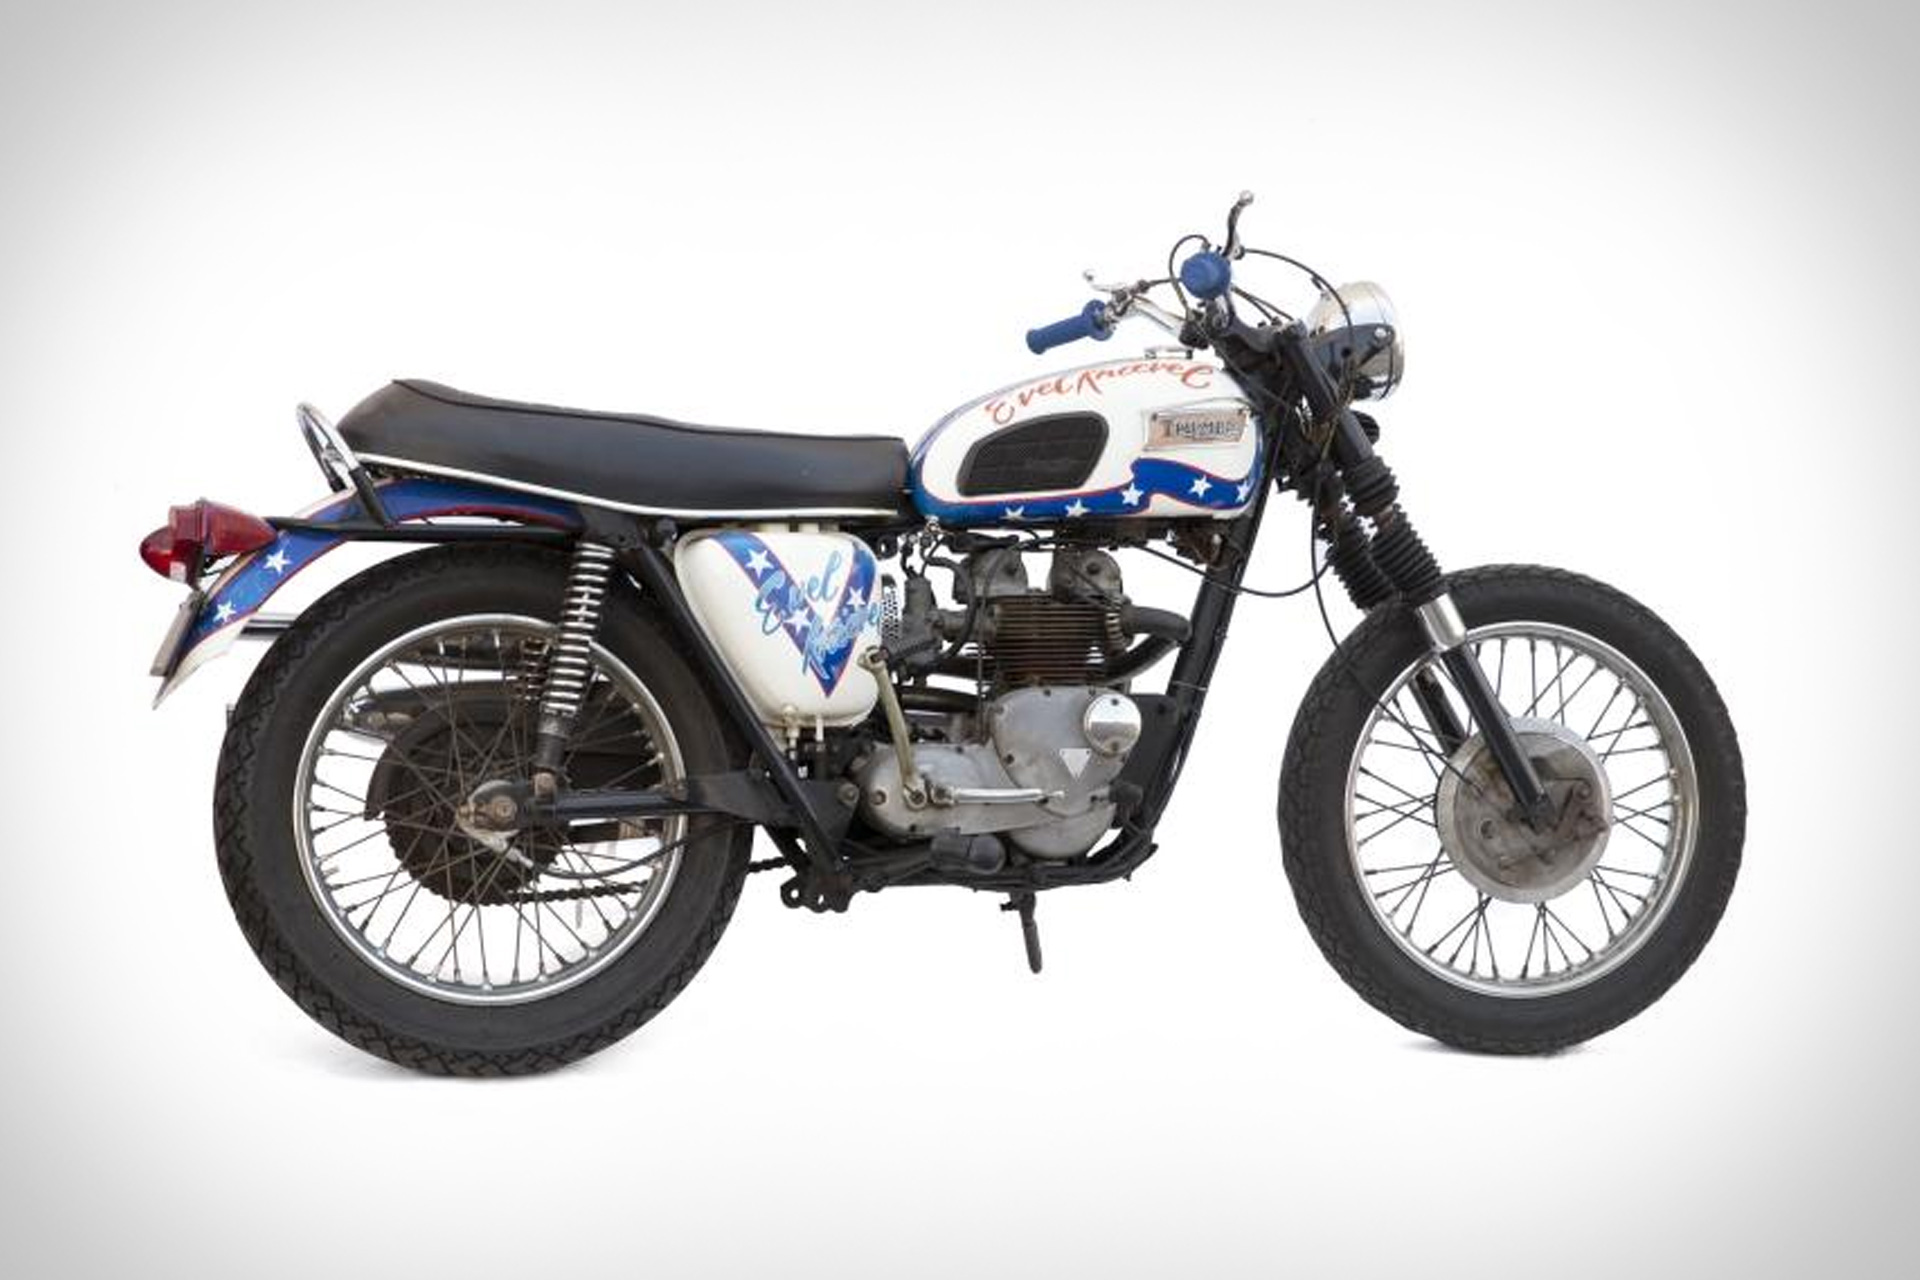 Evel Knievel's 1970 Triumph Motorcycle | Uncrate